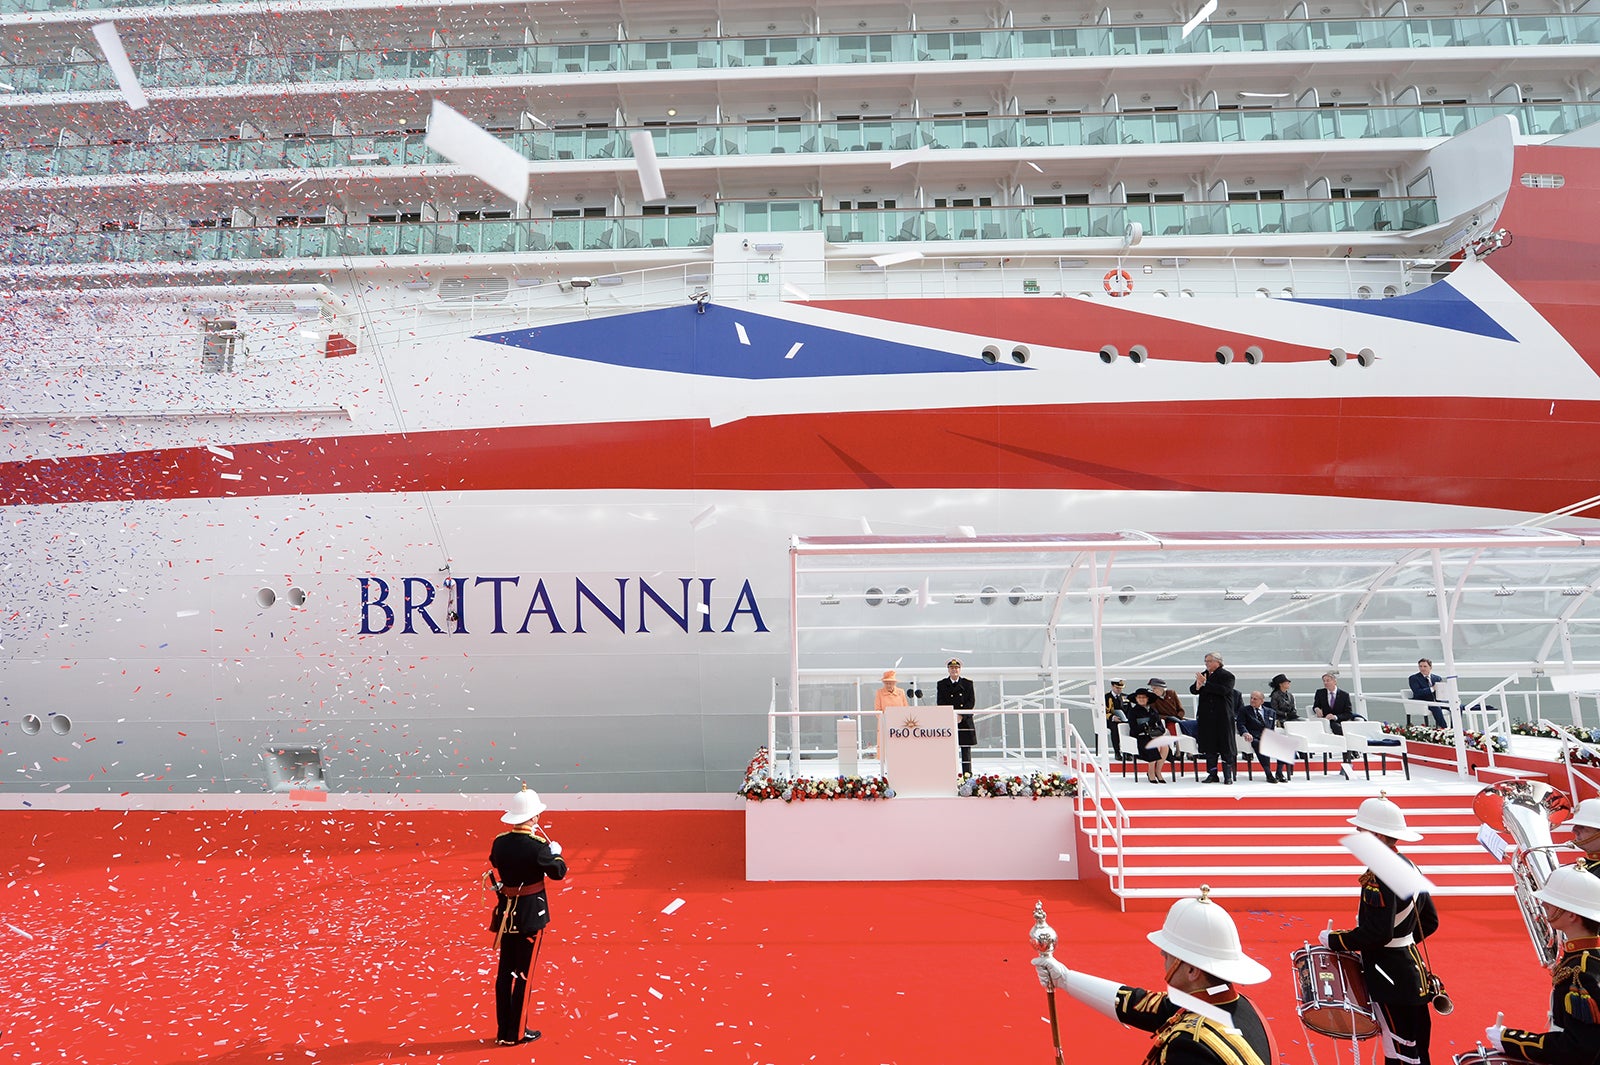 HM the Queen attends the opening of Britannia, P&O UK's largest ever ship built for the UK market on March 10 2015 in United Kingdom. (Photo by James D. Morgan/Getty Images)